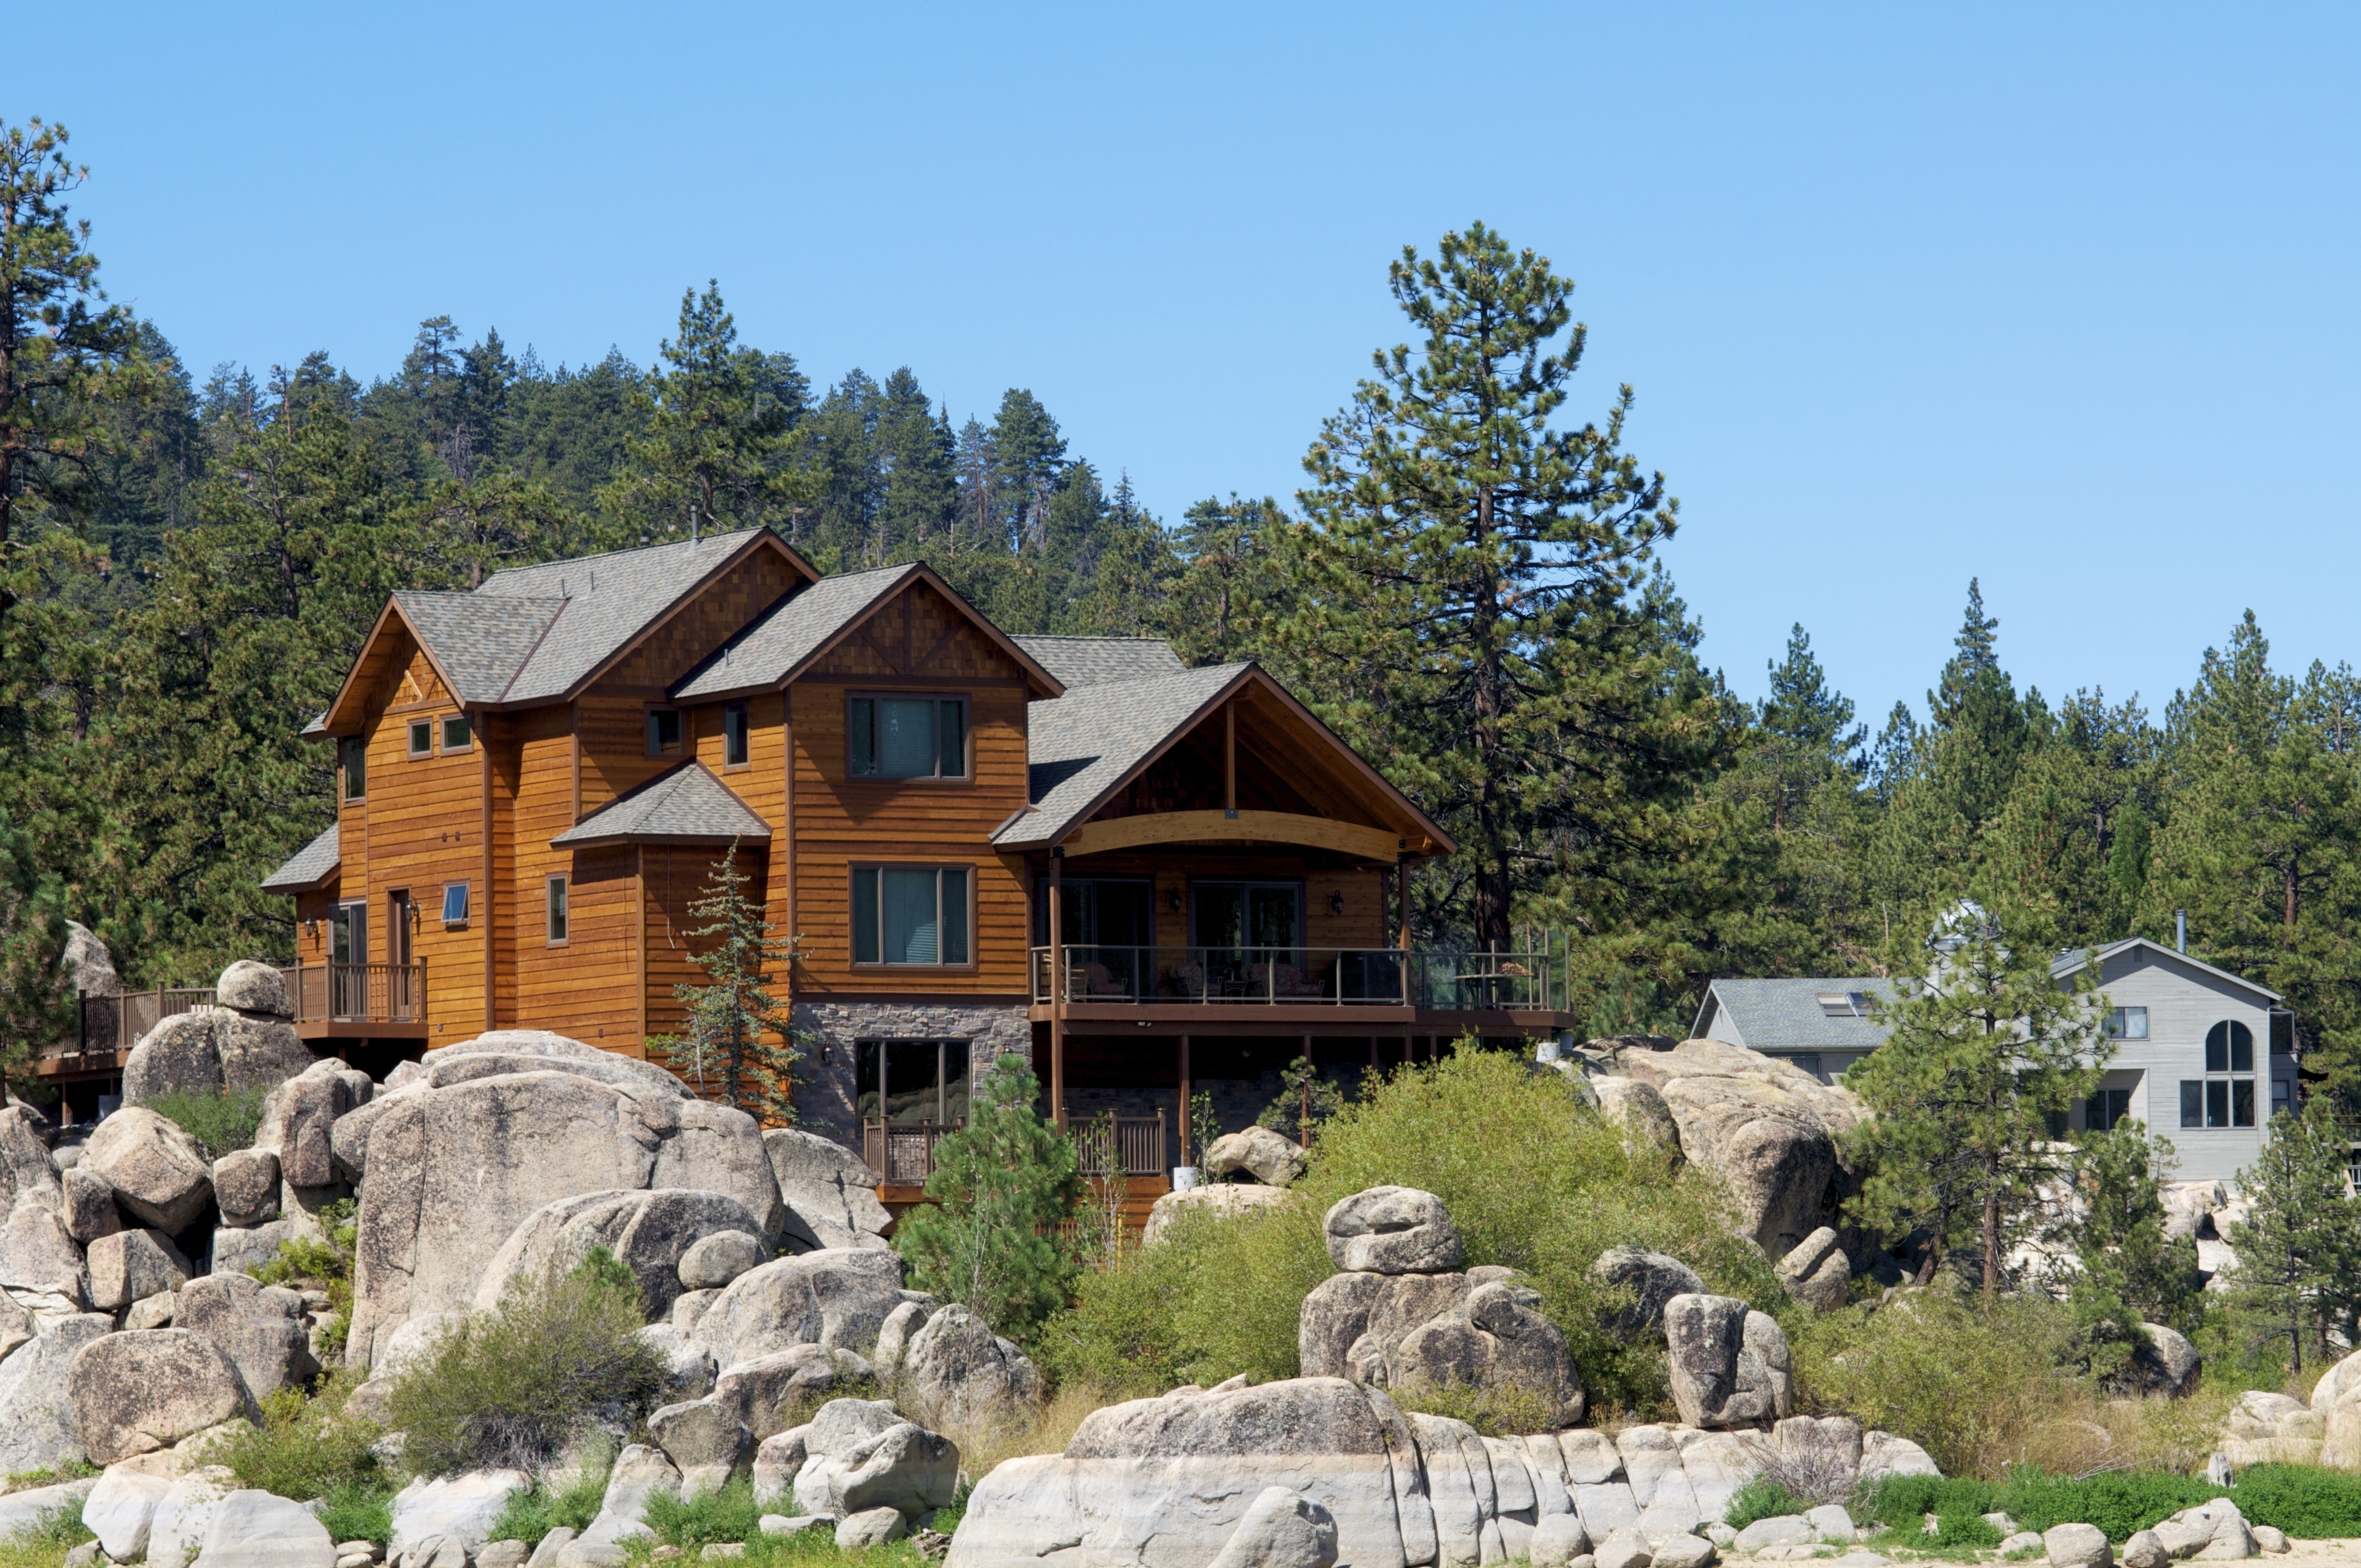 Luxury Lakefront Lake Tahoe Homes Condos For Sale Alvin Steinberg 1-800-666-4718 Coldwell Banker